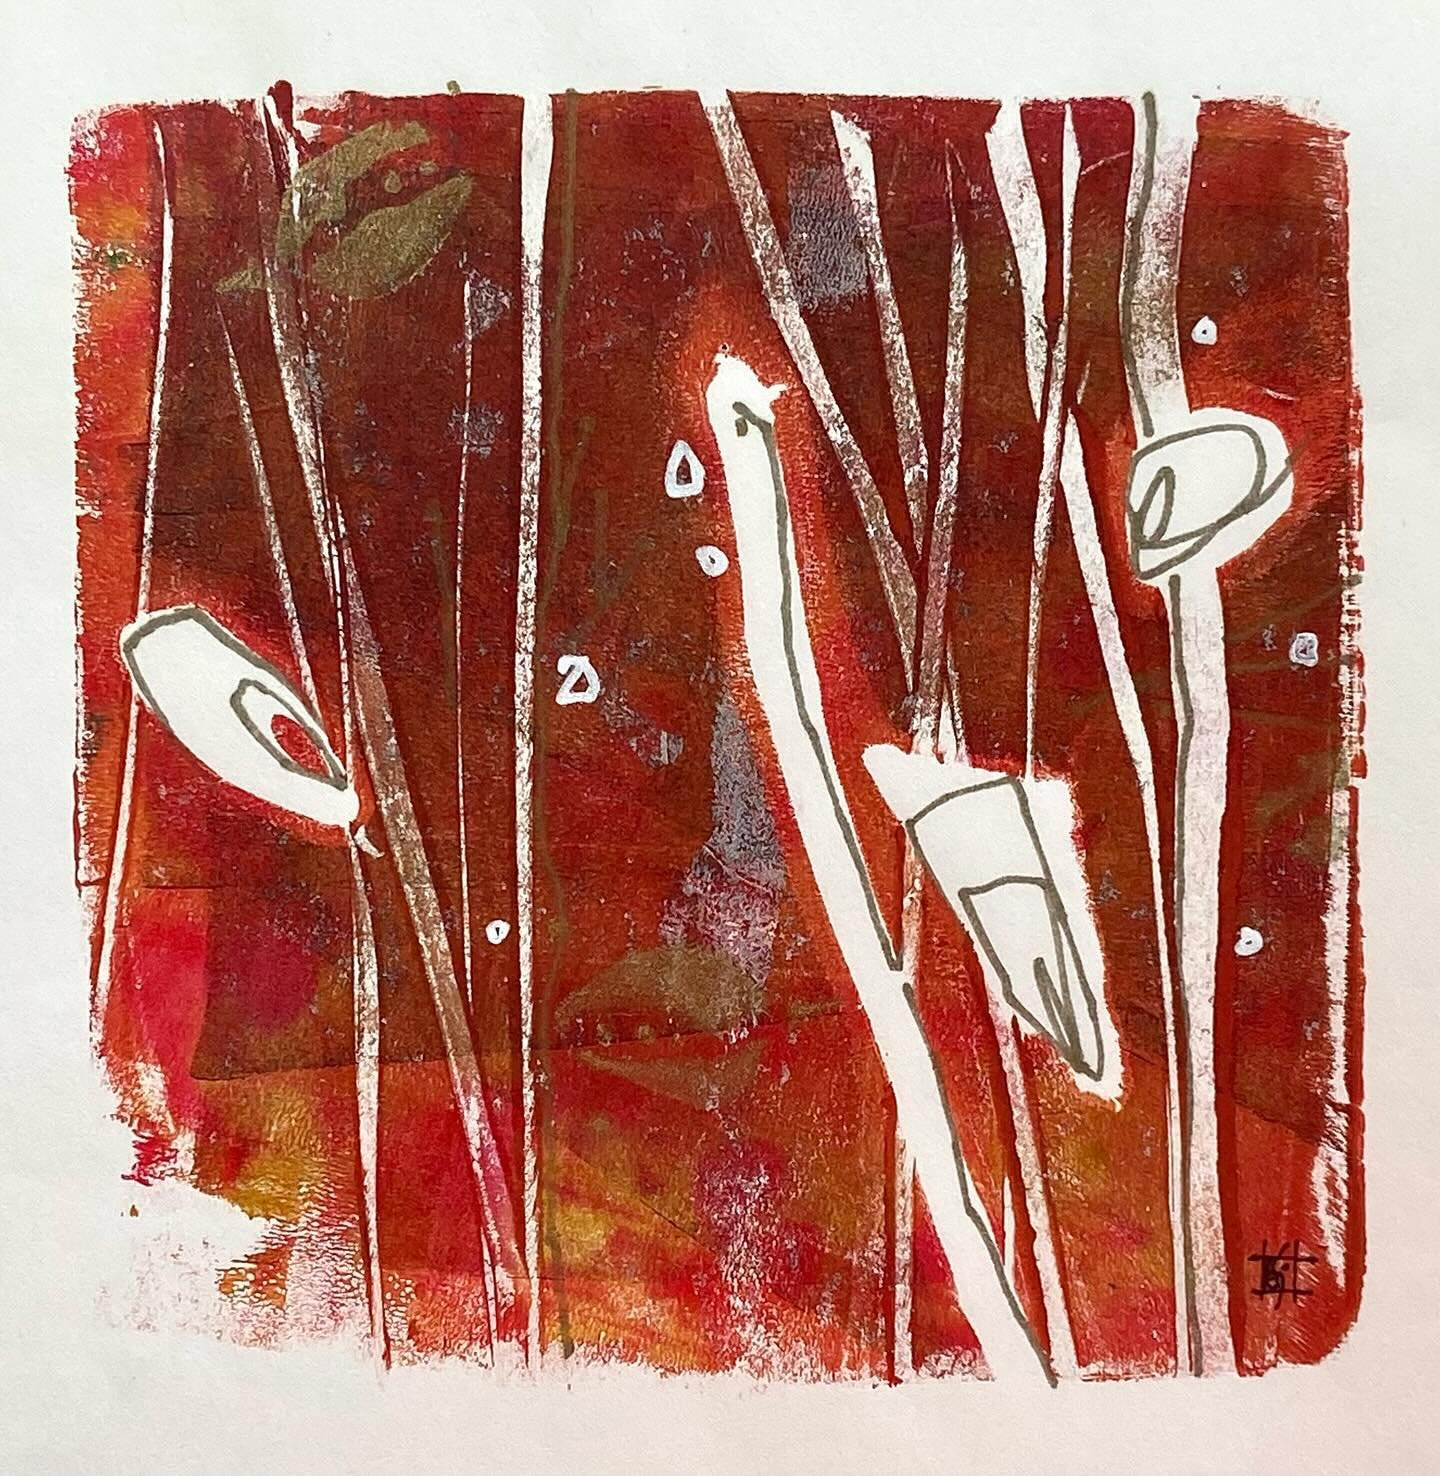 New monotype &ldquo;Fire Weed&rdquo;(&copy;️2024, acrylic monotype on paper, 7&rdquo;x7&rdquo;) will be on exhibit opening May 4th at the Alberta Society of Artists main gallery. 

#lorisokolukart #monotype #albertasocietyofartists #artexhibition #co